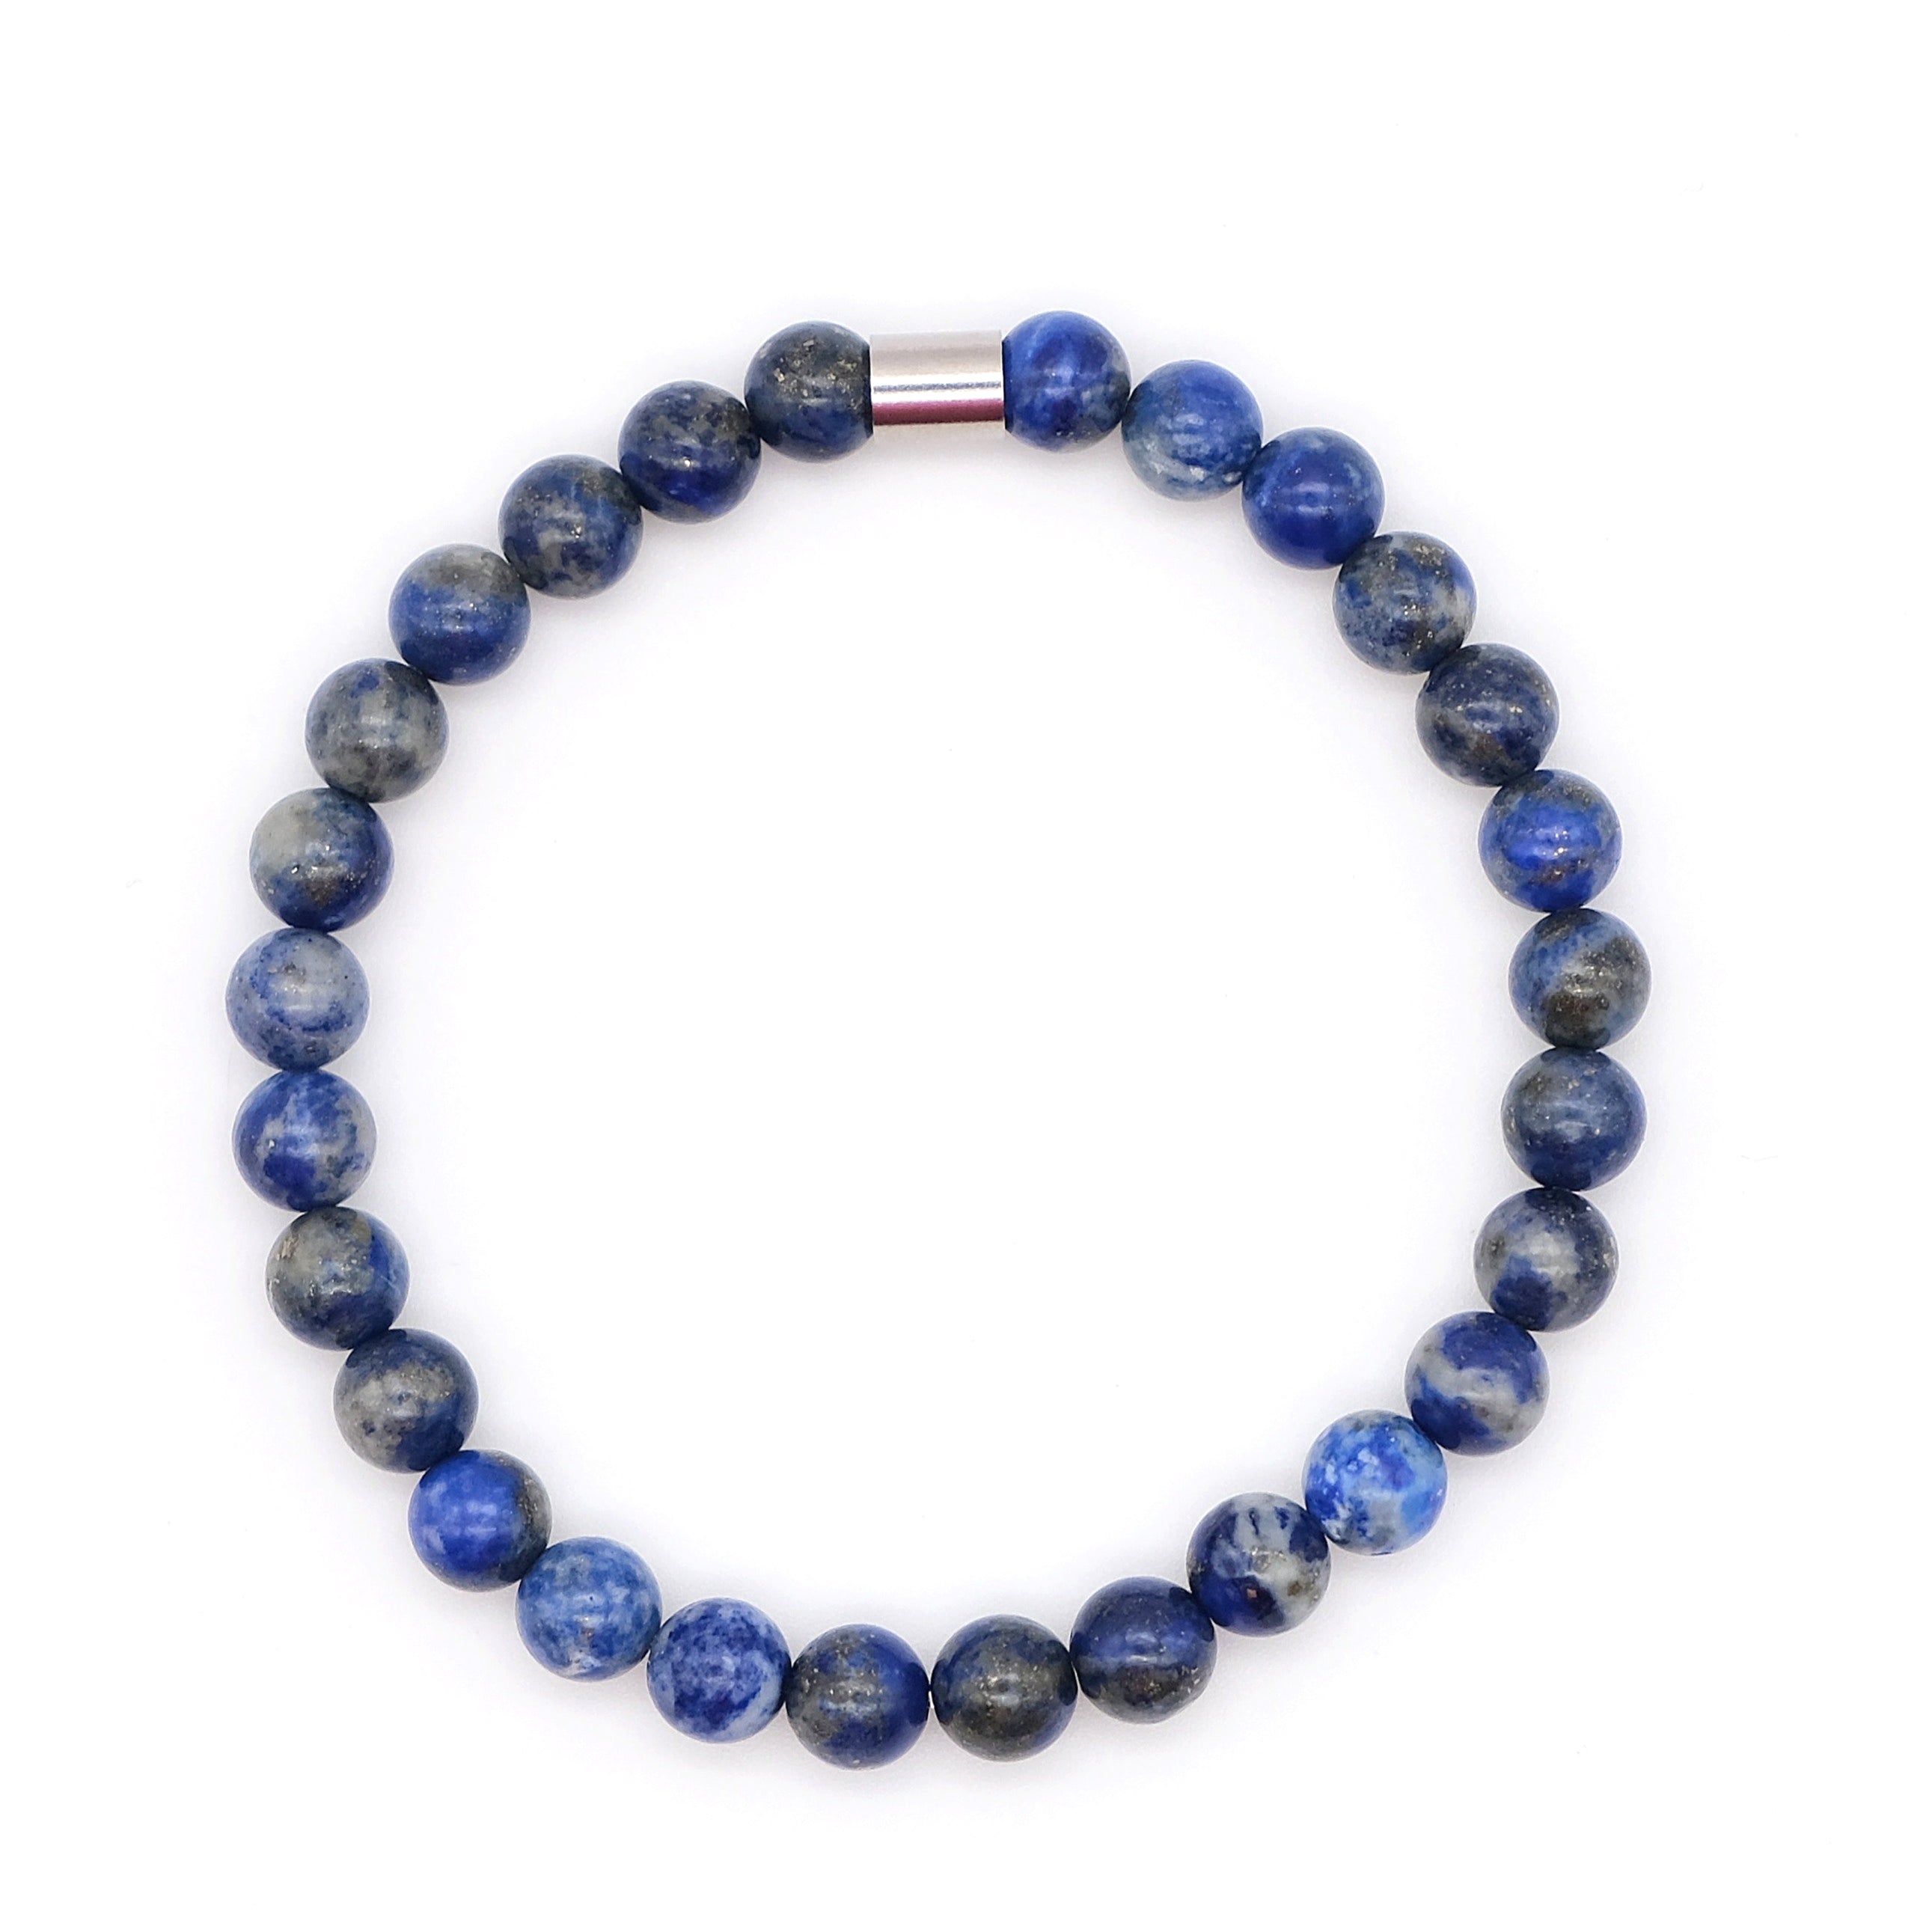 Lapis lazuli gemstone bracelet in 6mm beads with steel accessory from above